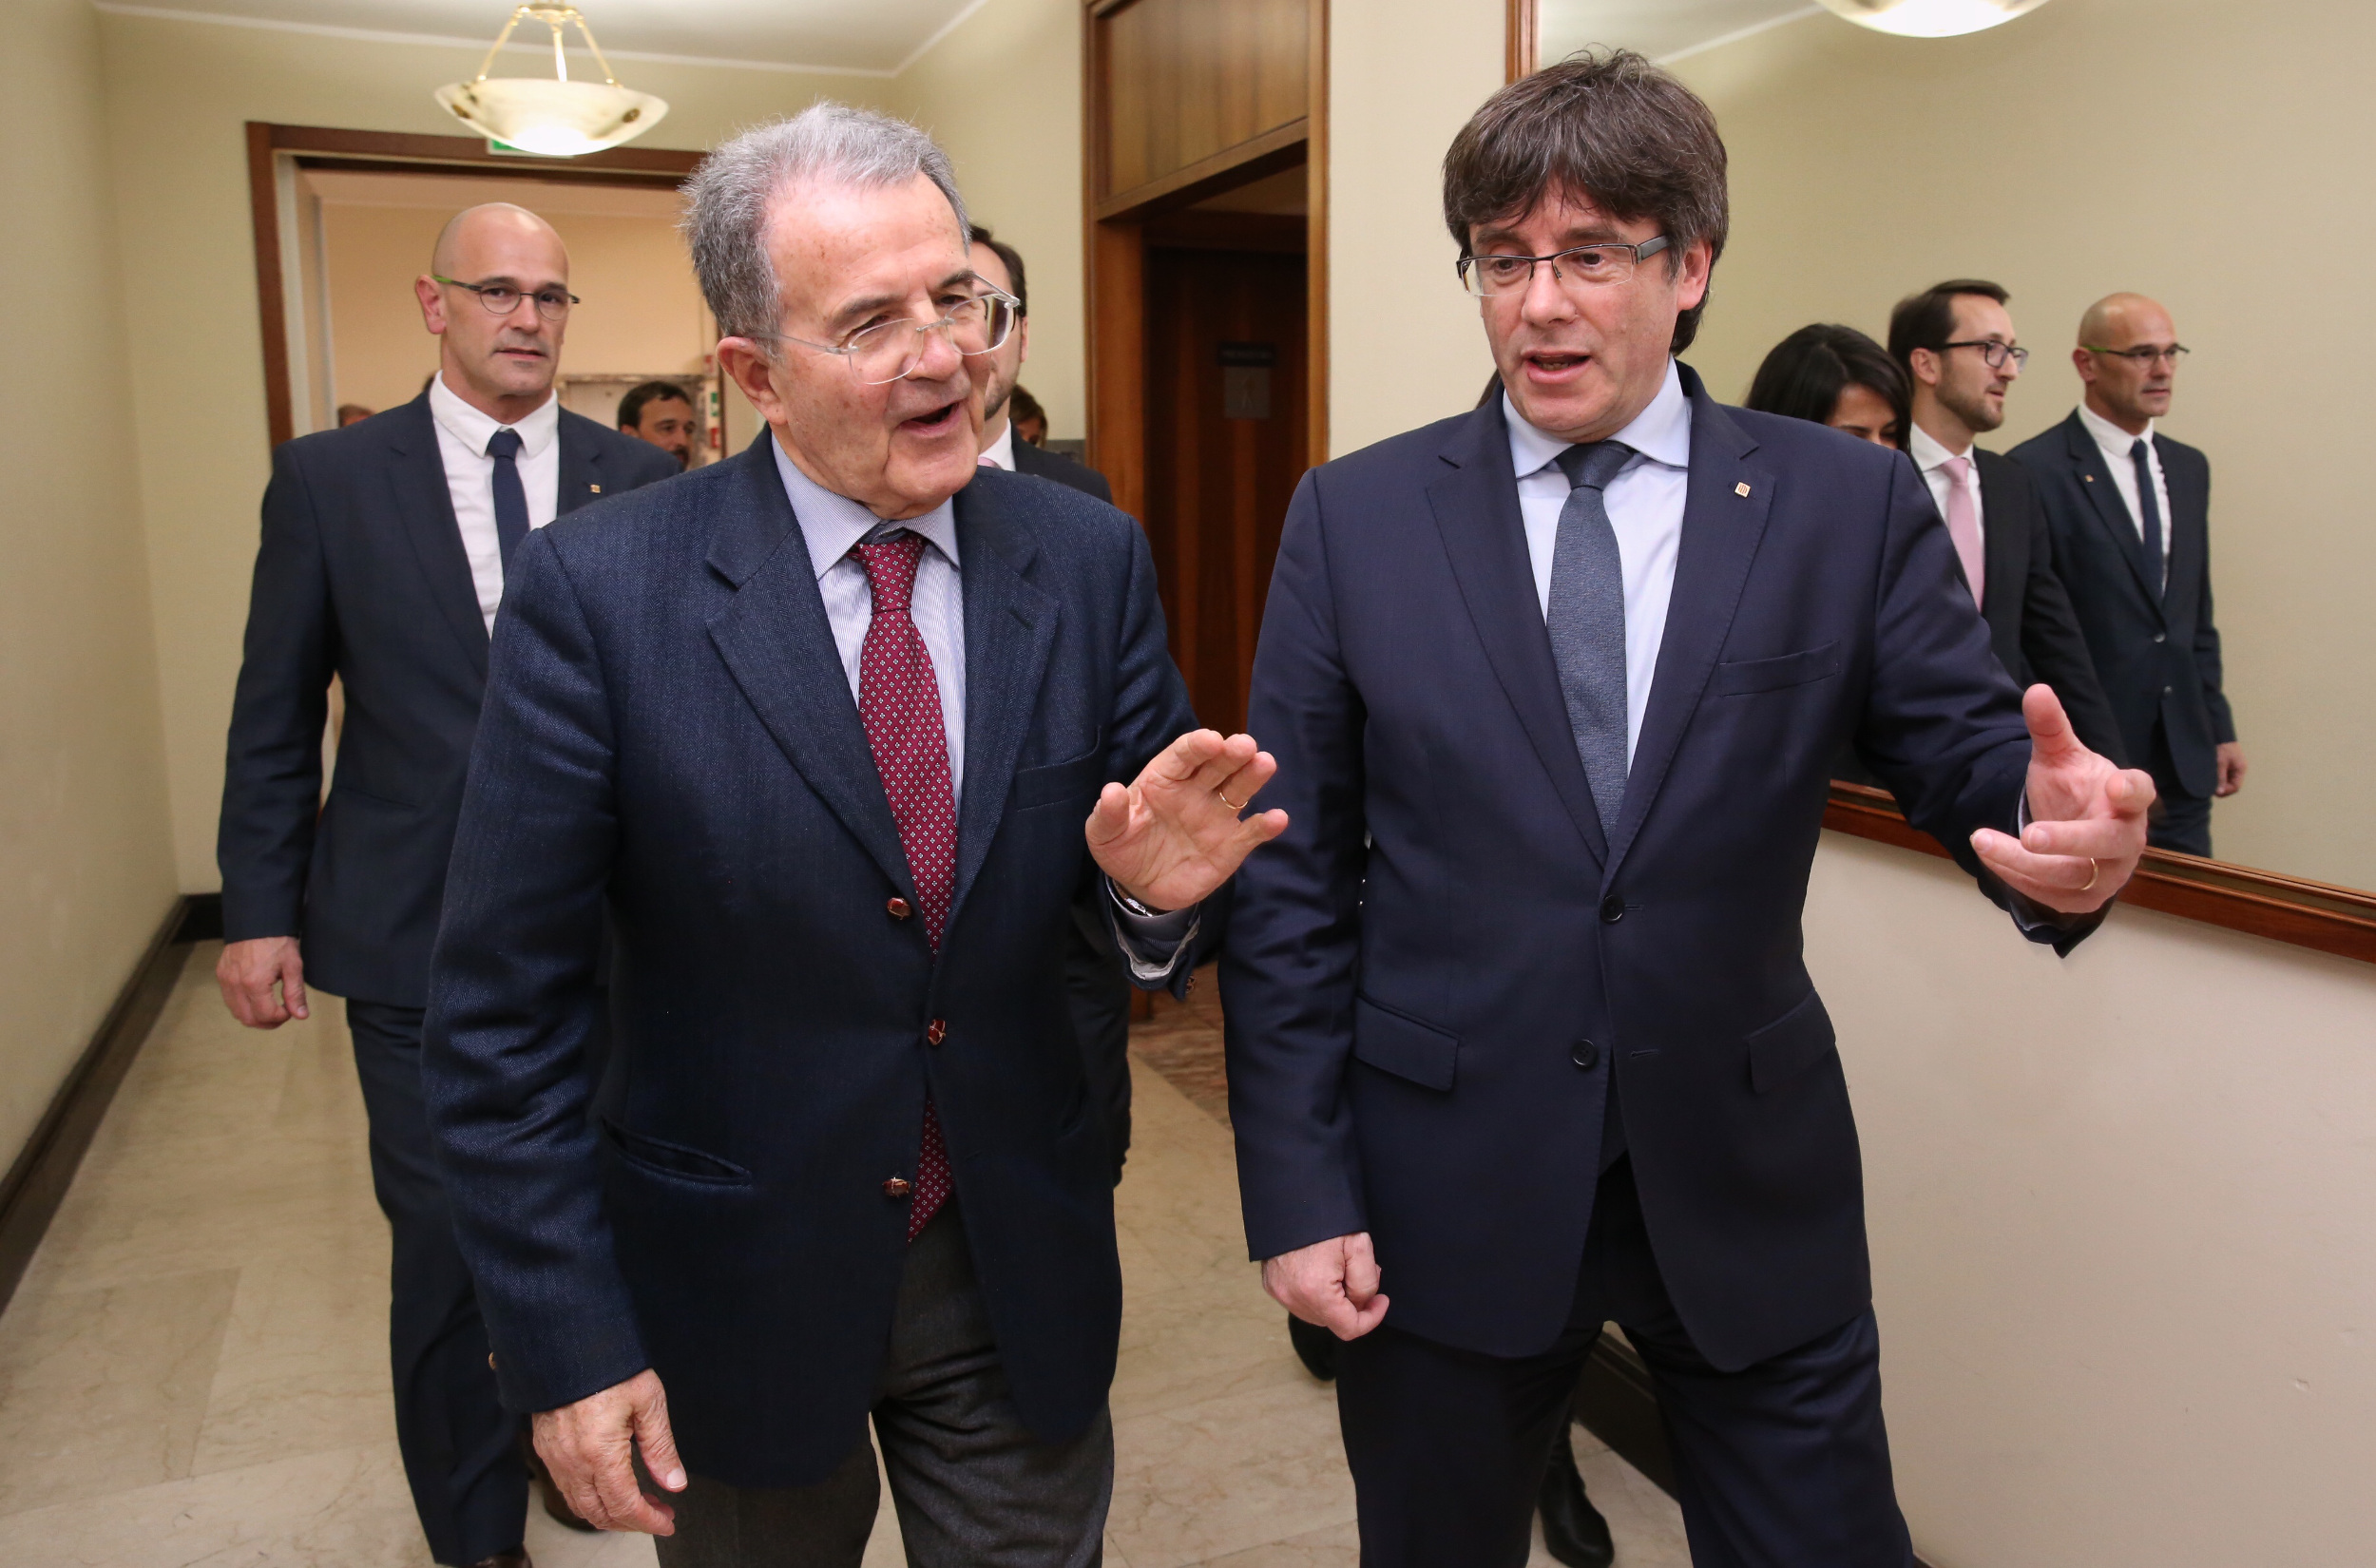 The President of the Generalitat, Carles Puigdemont, with former Italian PM and former President of the European Commission, Romano Prodi in Bologna in April